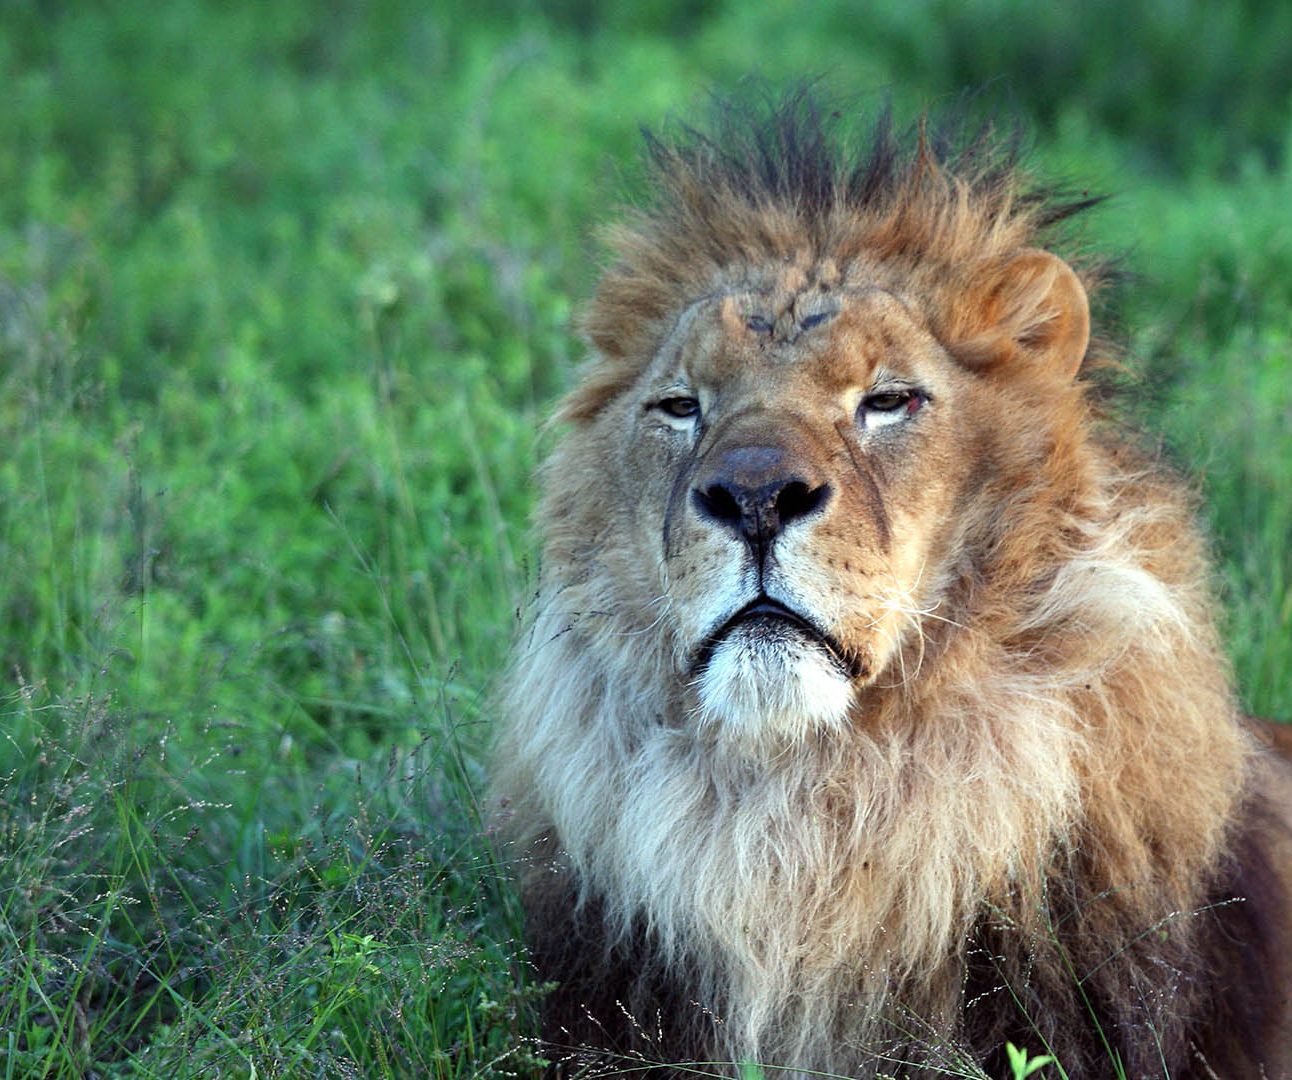 A male lion sits with head raised against a grassy backdrop